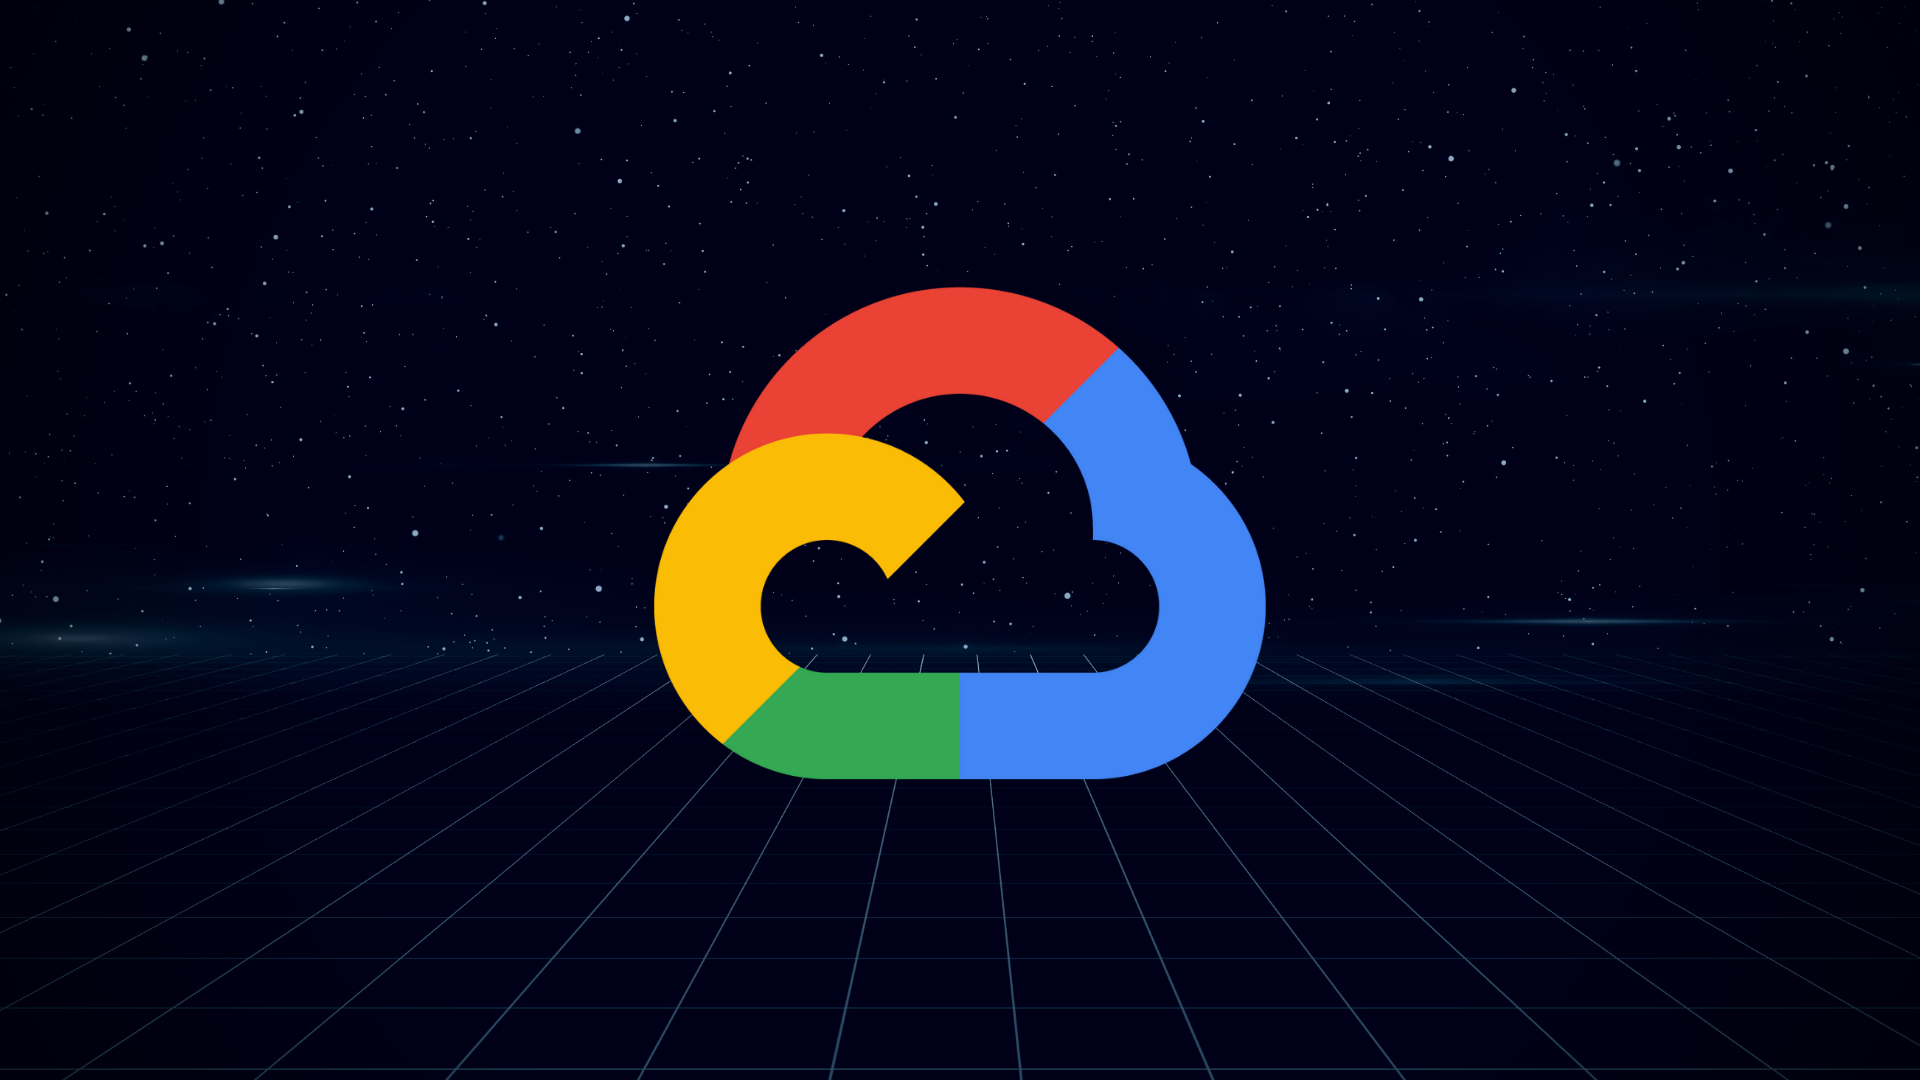 Google Cloud Platform: Identity and Access Management, Secure Networking, and Data Loss Protection